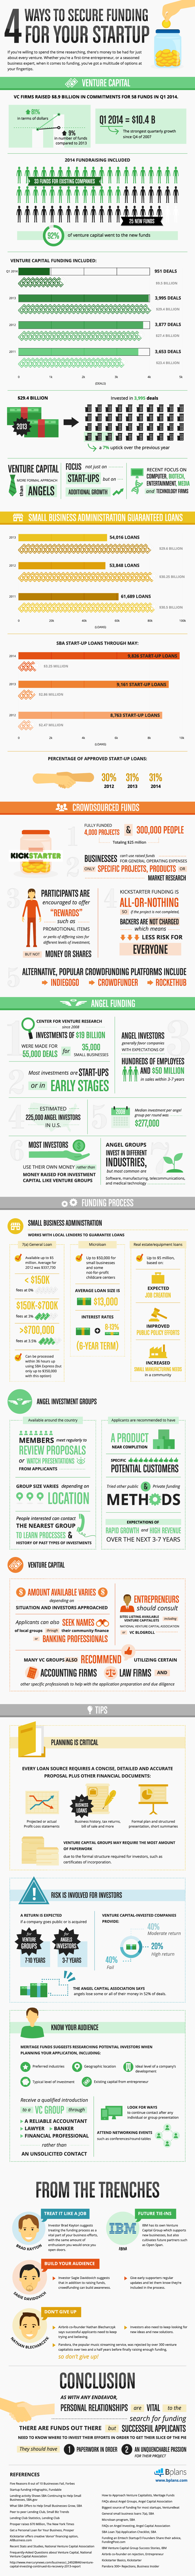 Infographic: 4 Ways to Get Your Business Funded